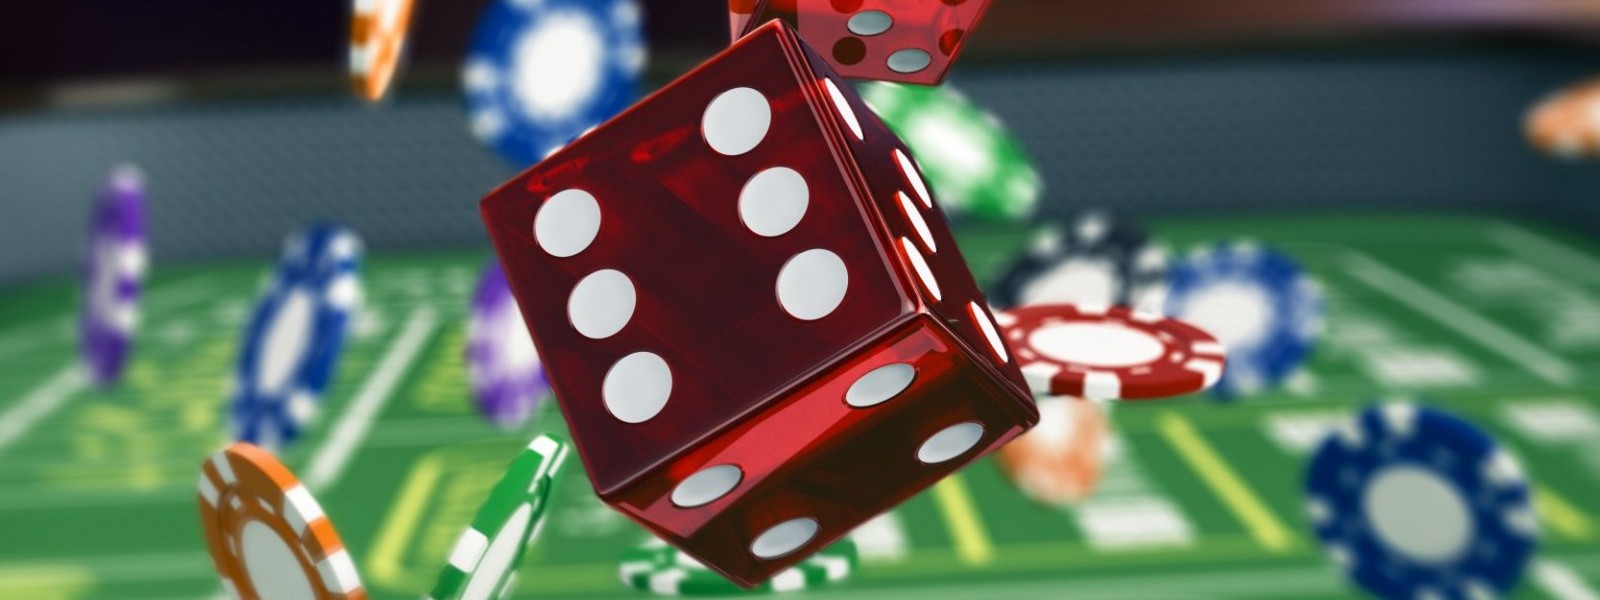 Local politician nabbed for operating gambling den